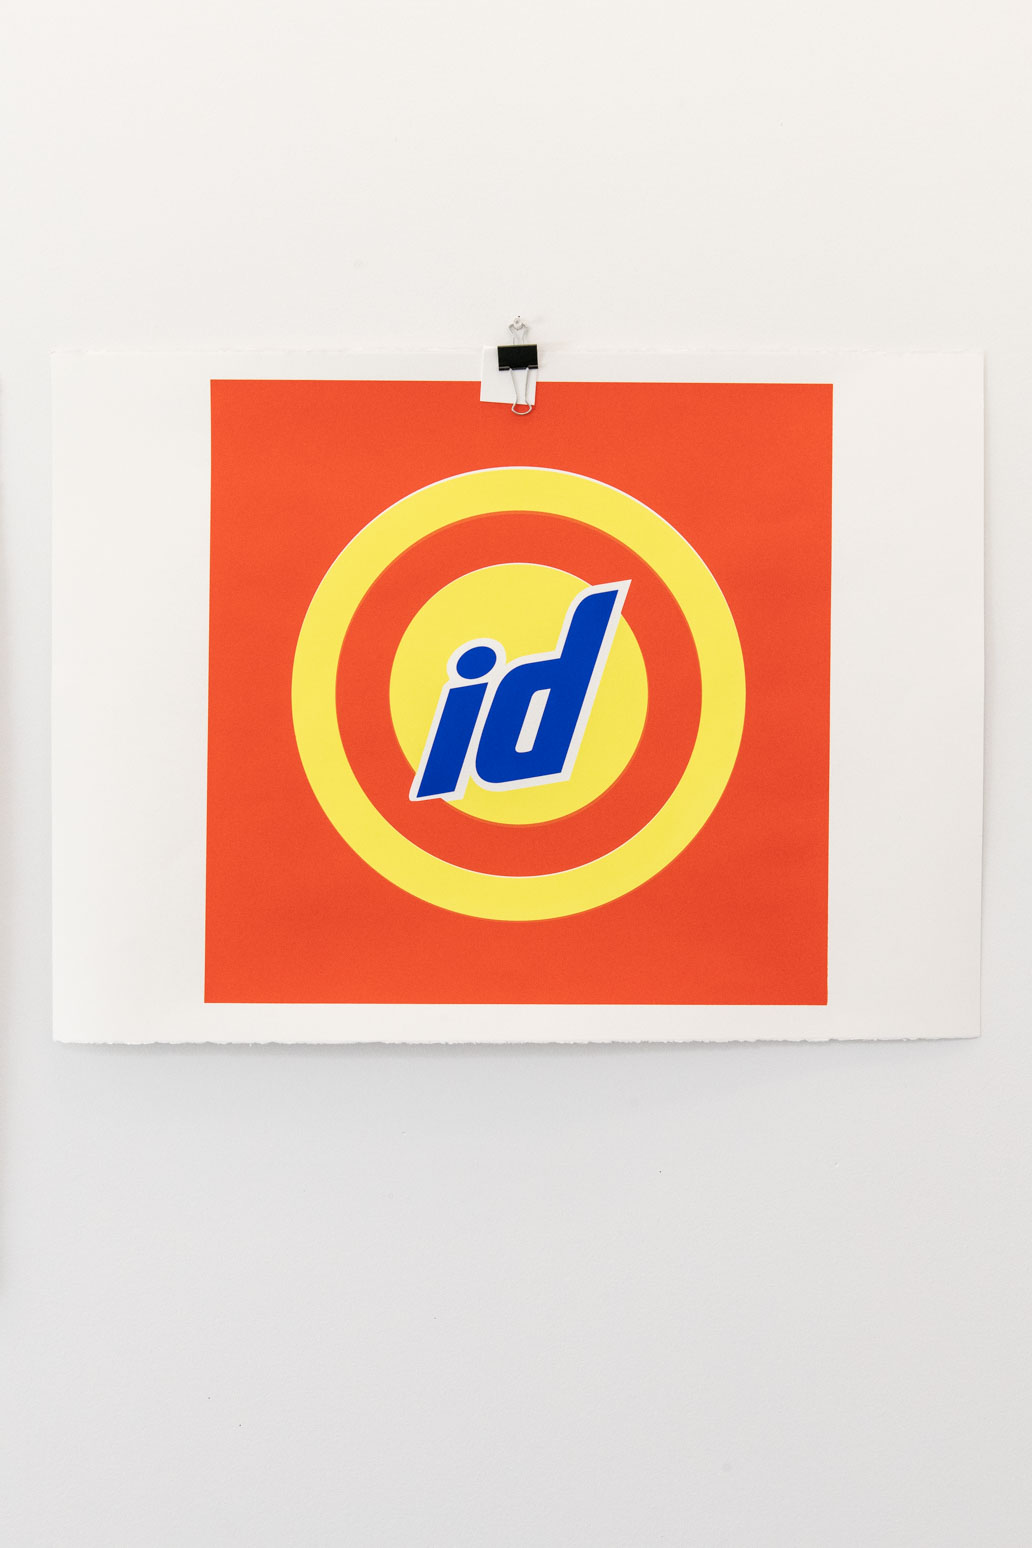 Single artwork featuring the letters 'id' overtop yellow circles on a orange background hanging on the wall of Dana's st